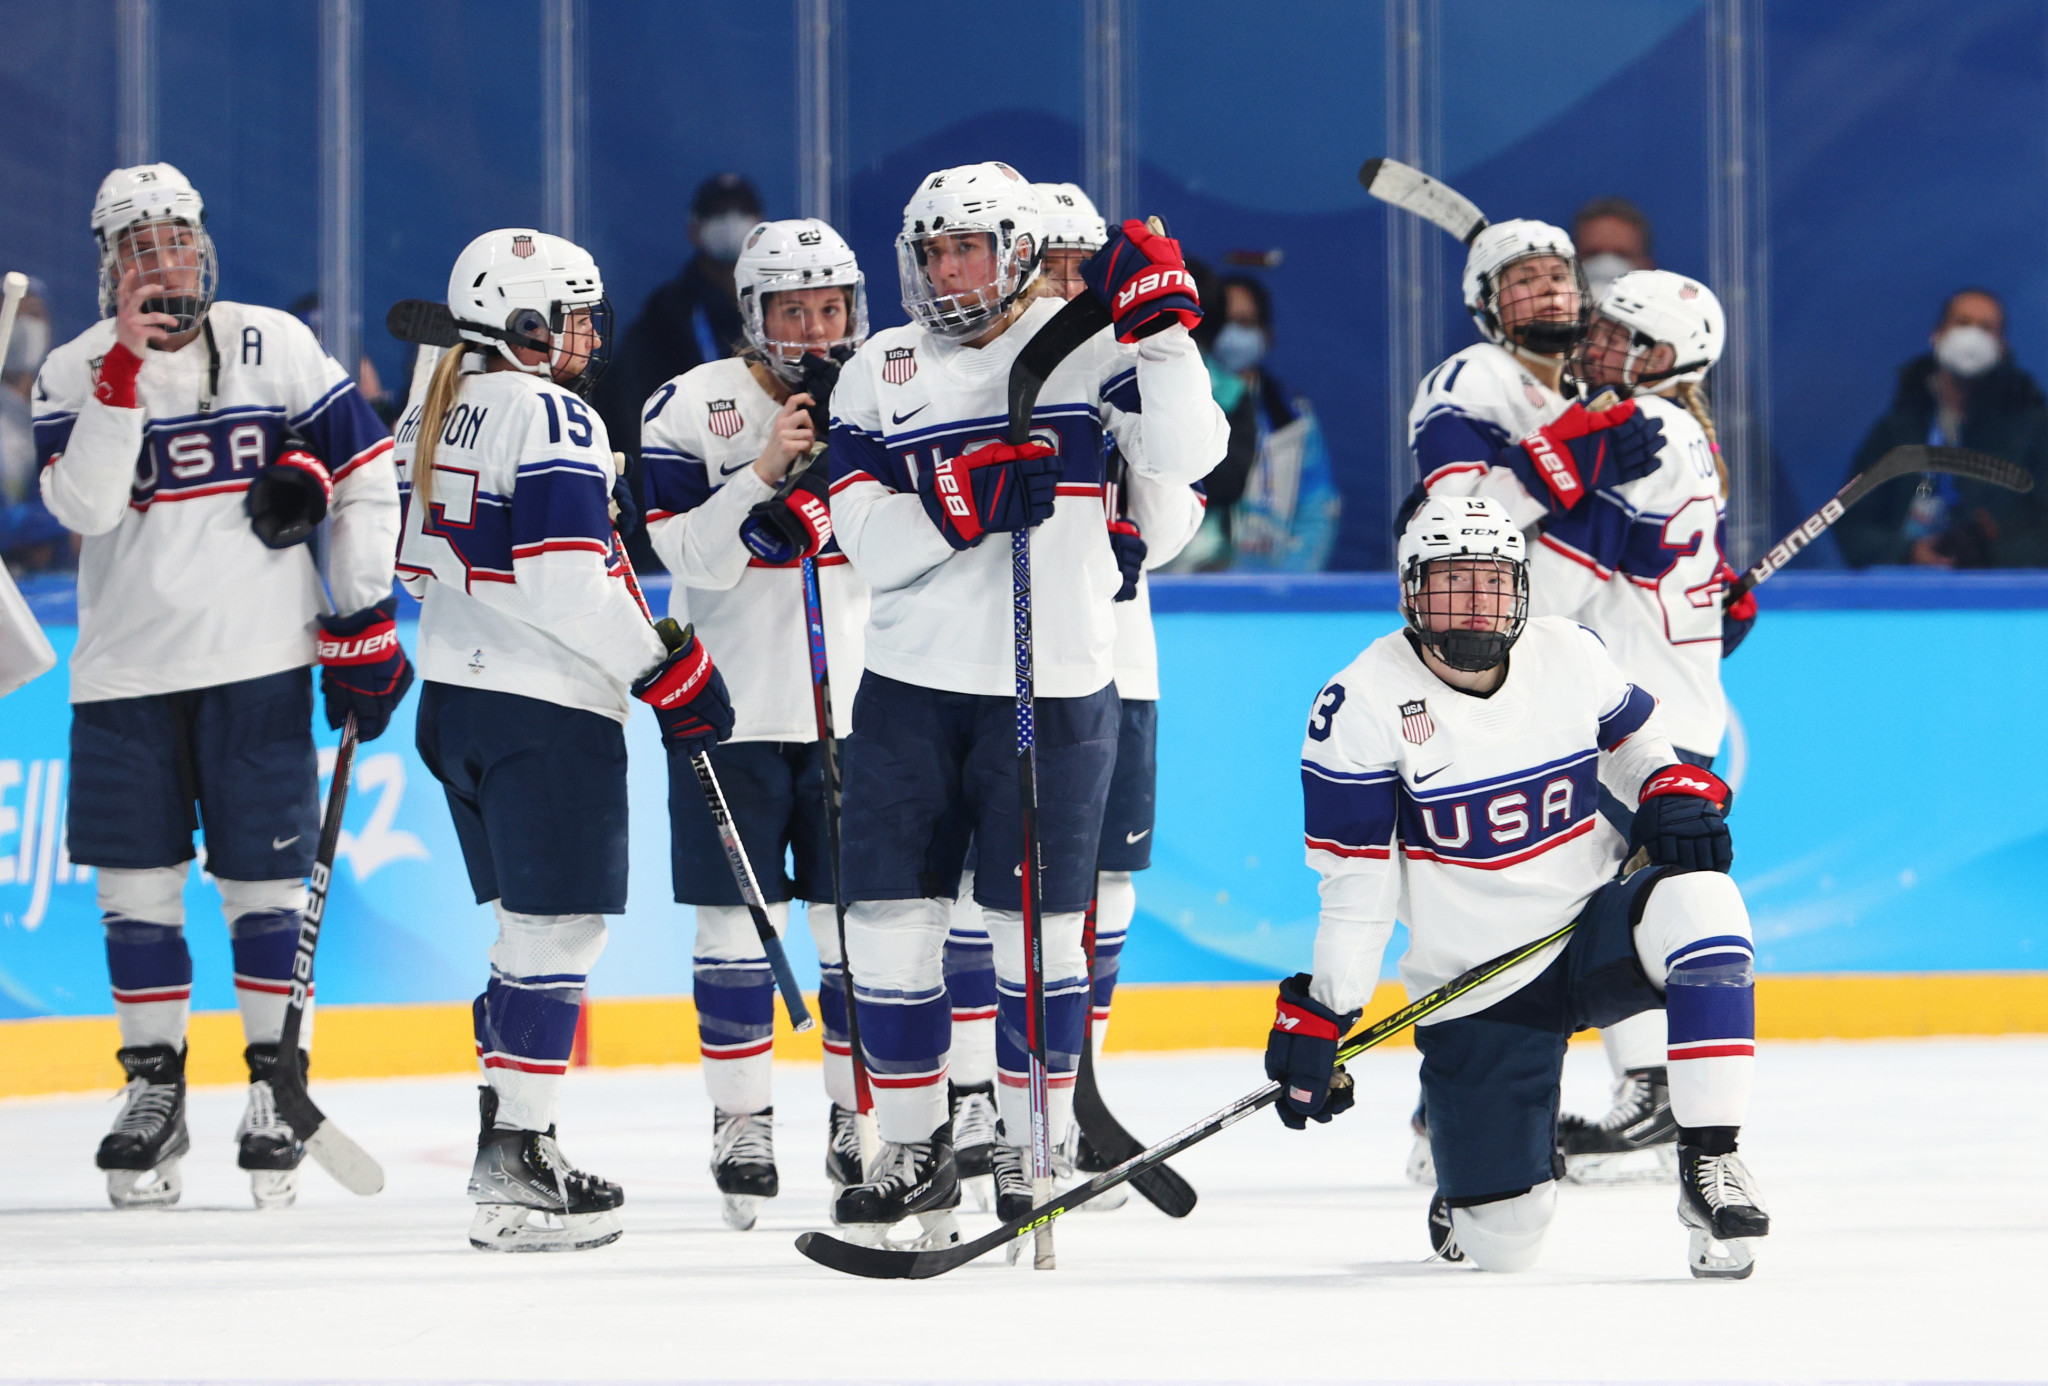 The United States women lost to Canada in the gold medal match at Beijing 2022 ©Getty Images